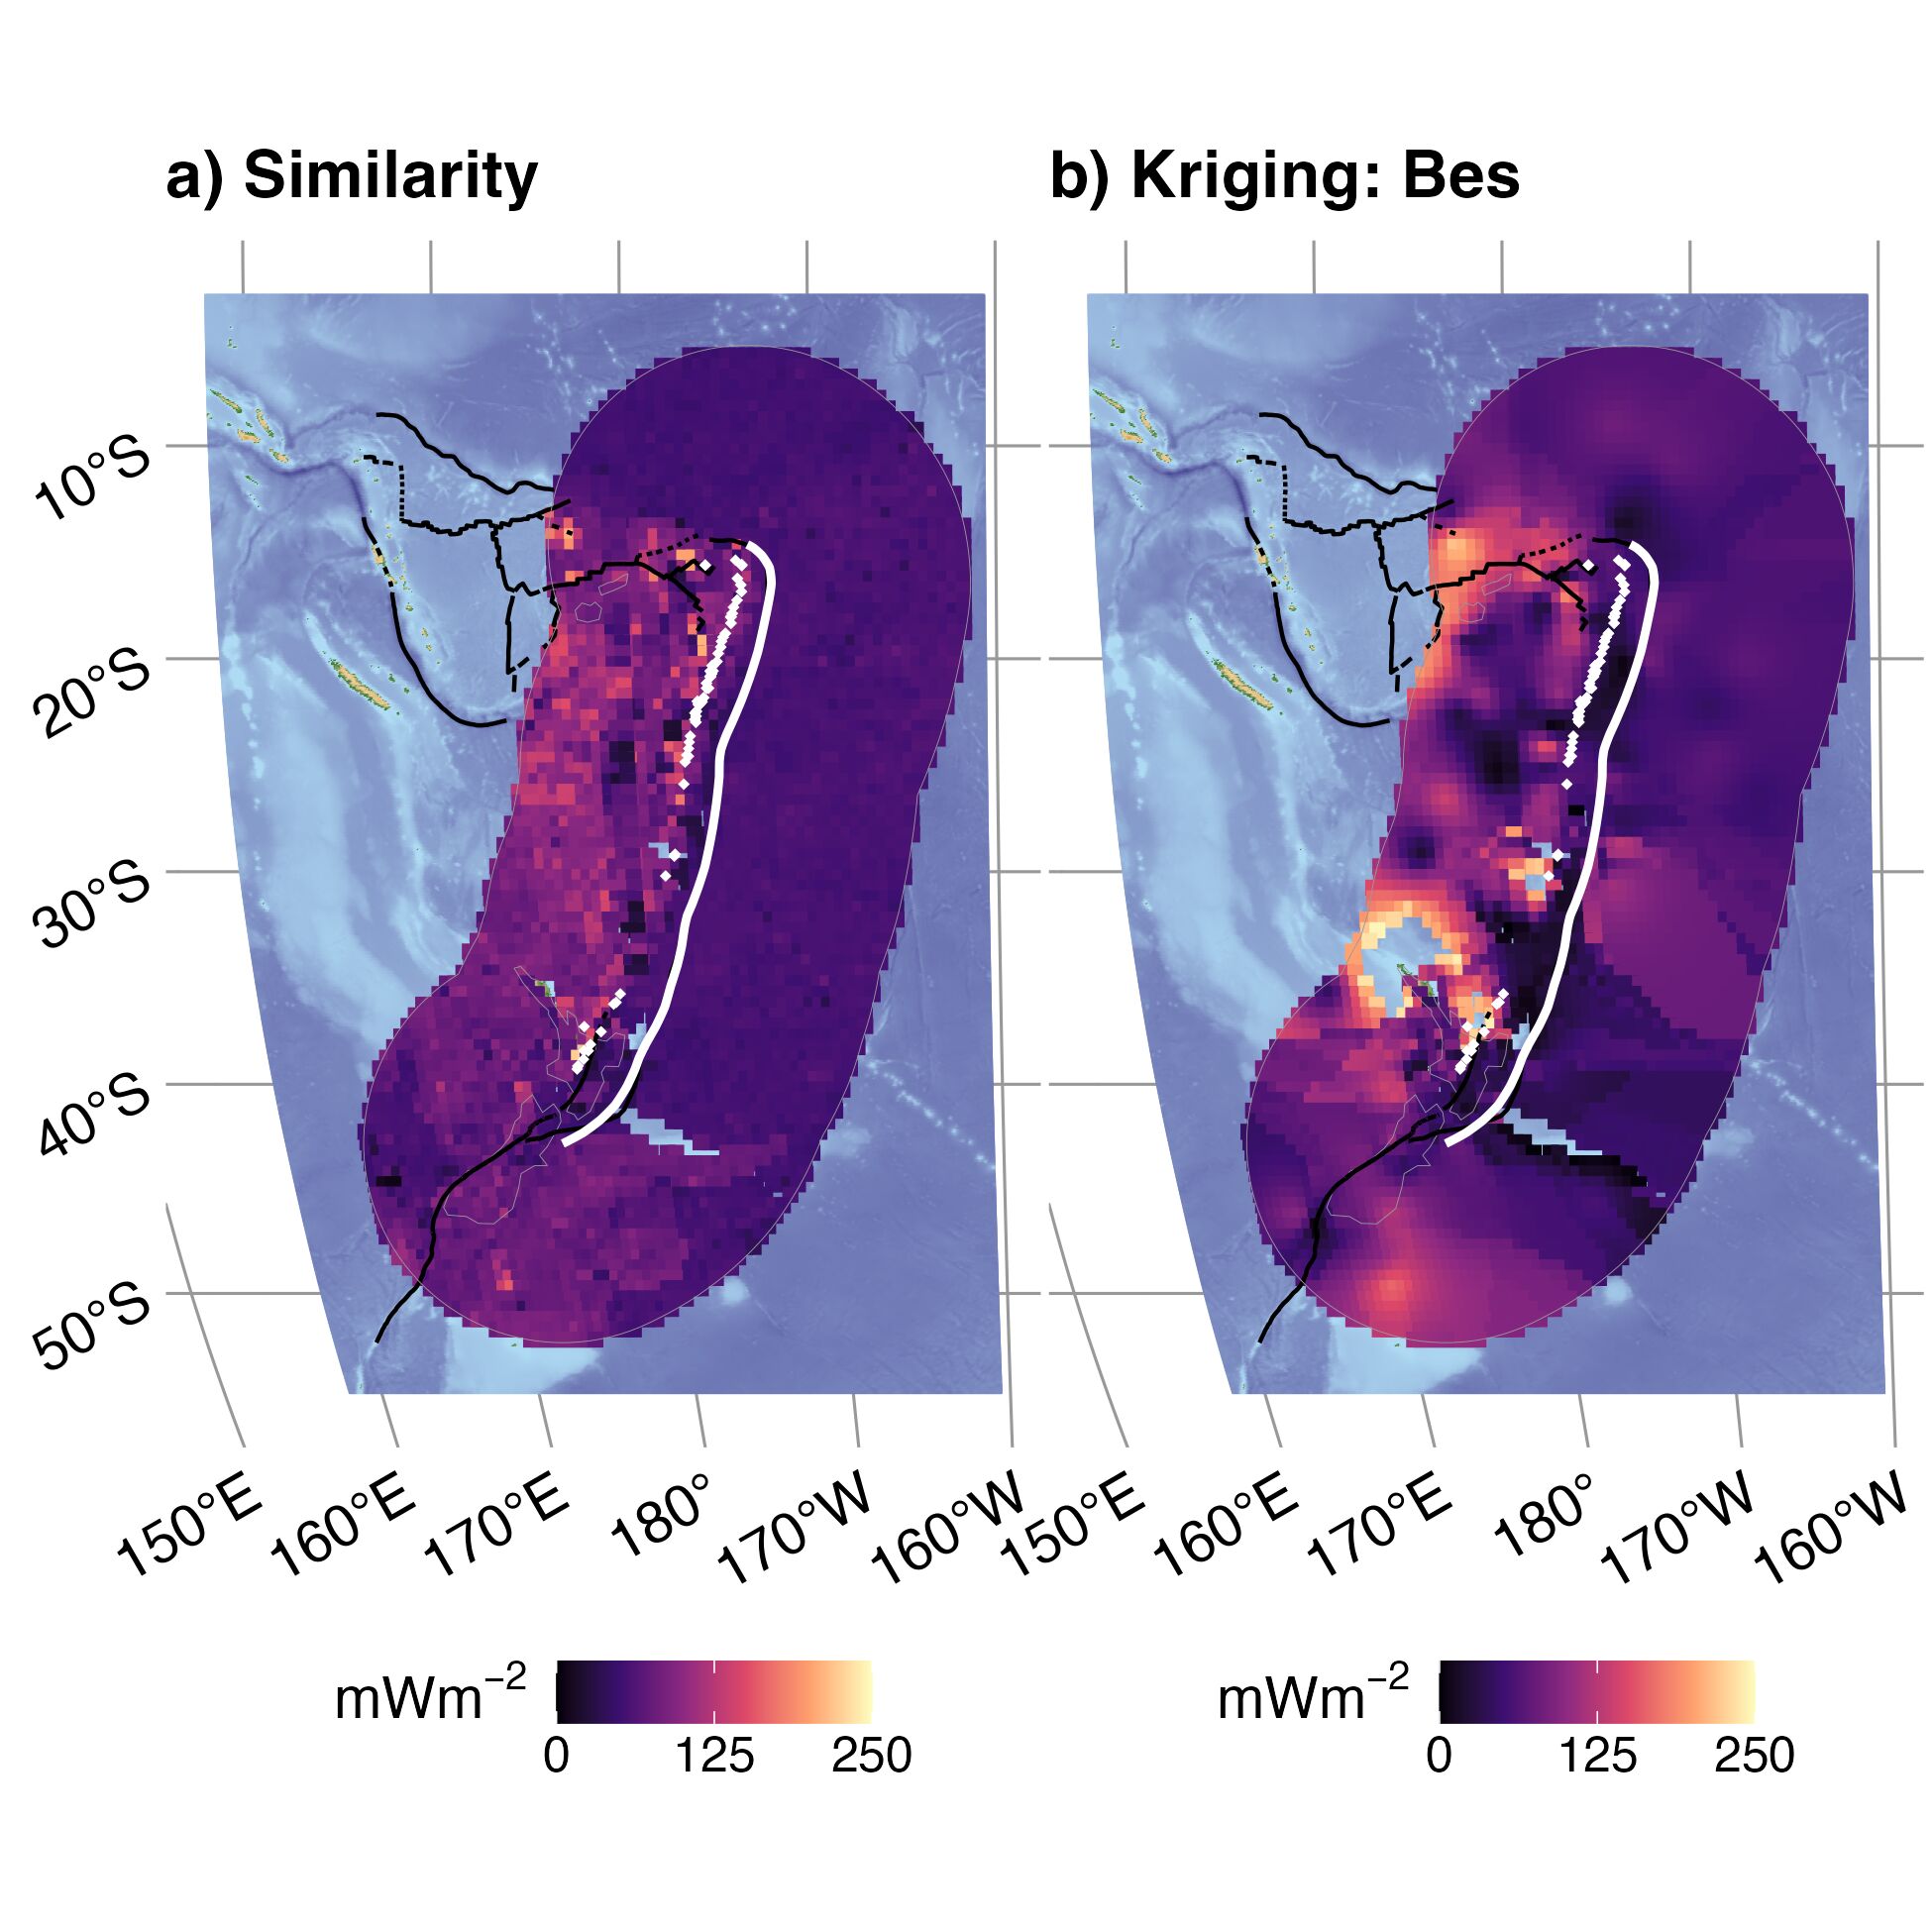 Similarity (a) and Kriging (b) interpolations for Tonga New Zealand. Refer to the main text for explanation of panels and colors.